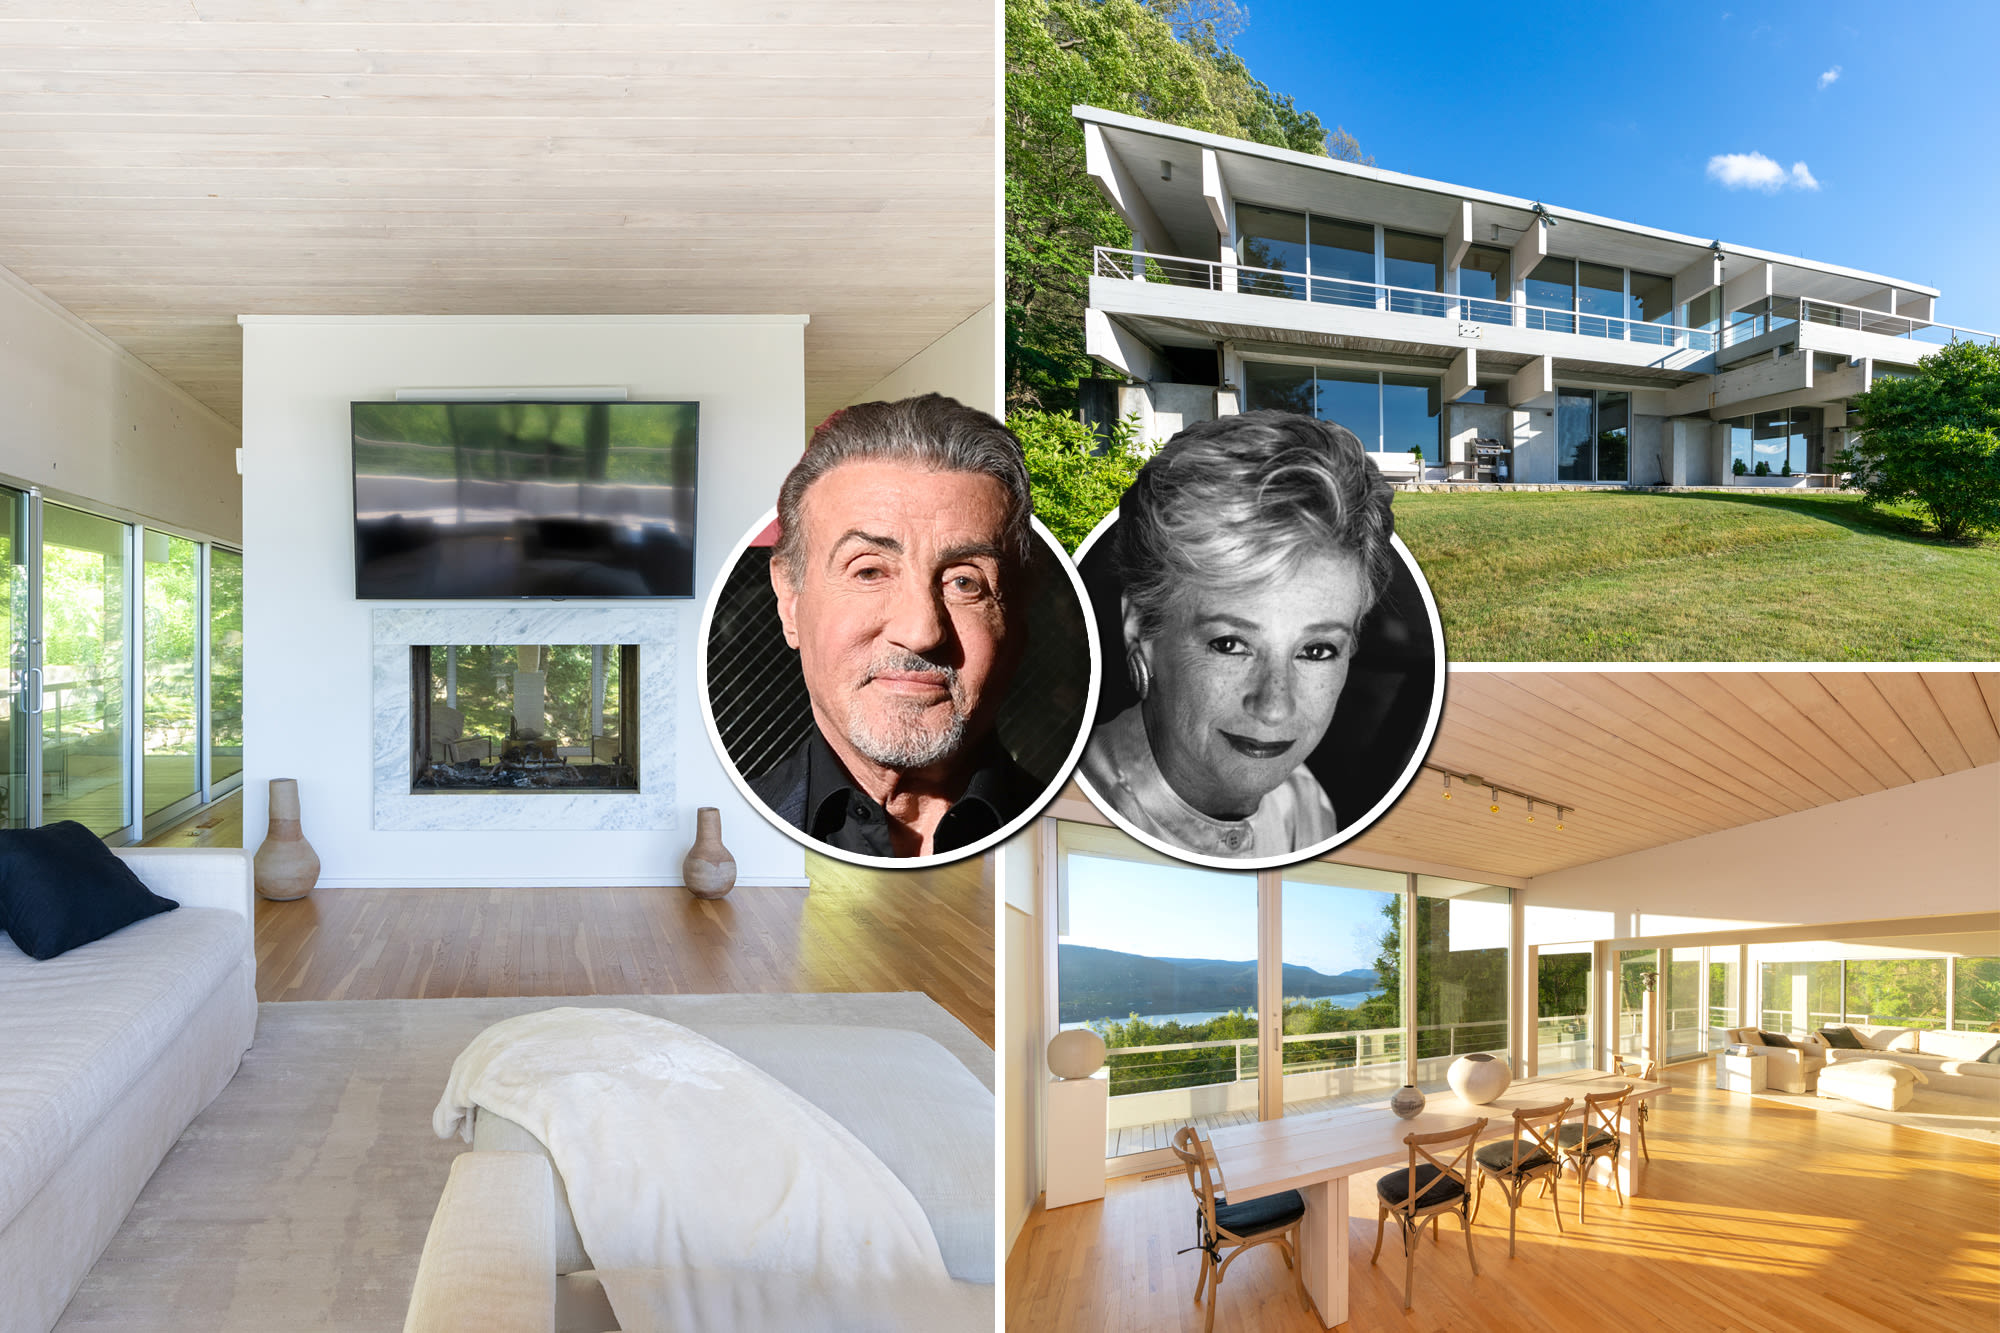 Sylvester Stallone’s former upstate New York home lists for $4.29M